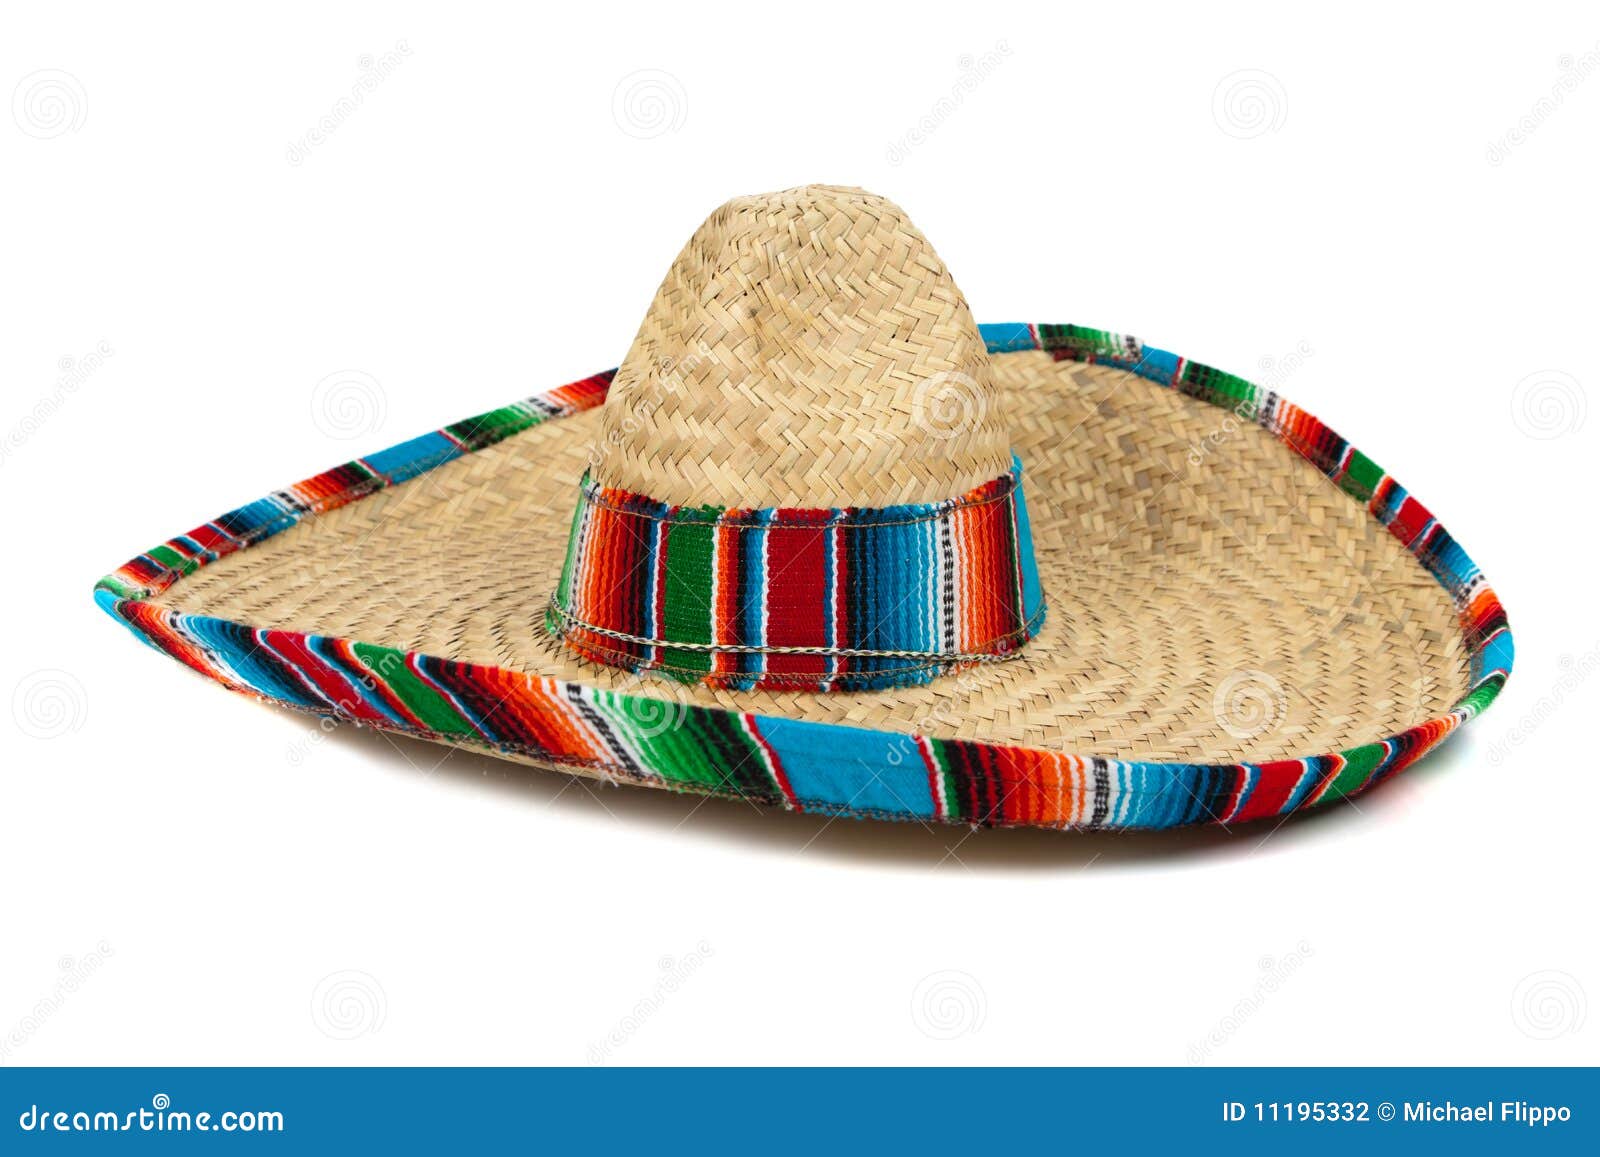 straw mexican sombrero on white background